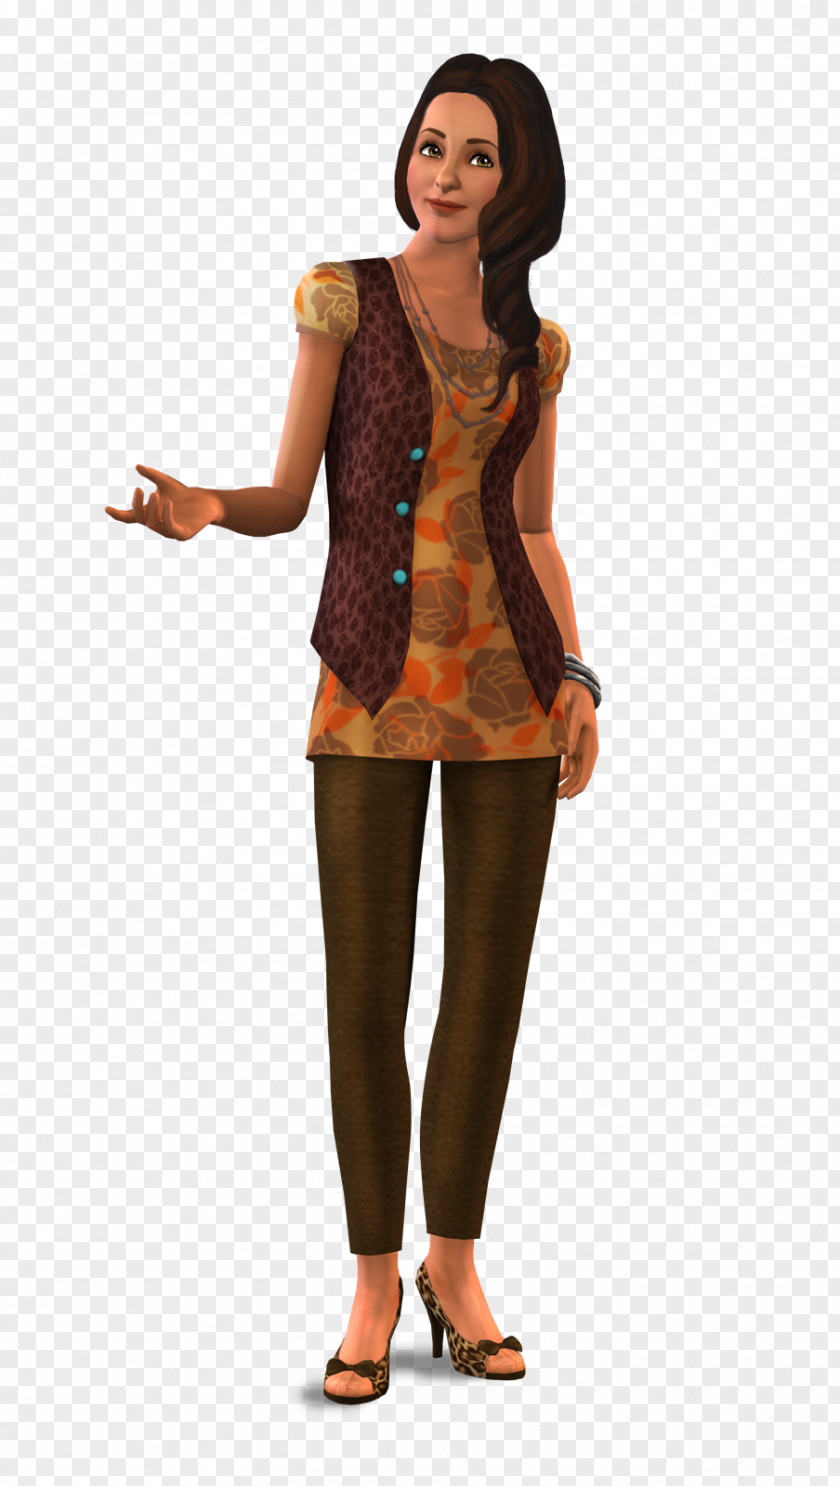 Sims The 3: University Life 4 PlayStation 3 PNG